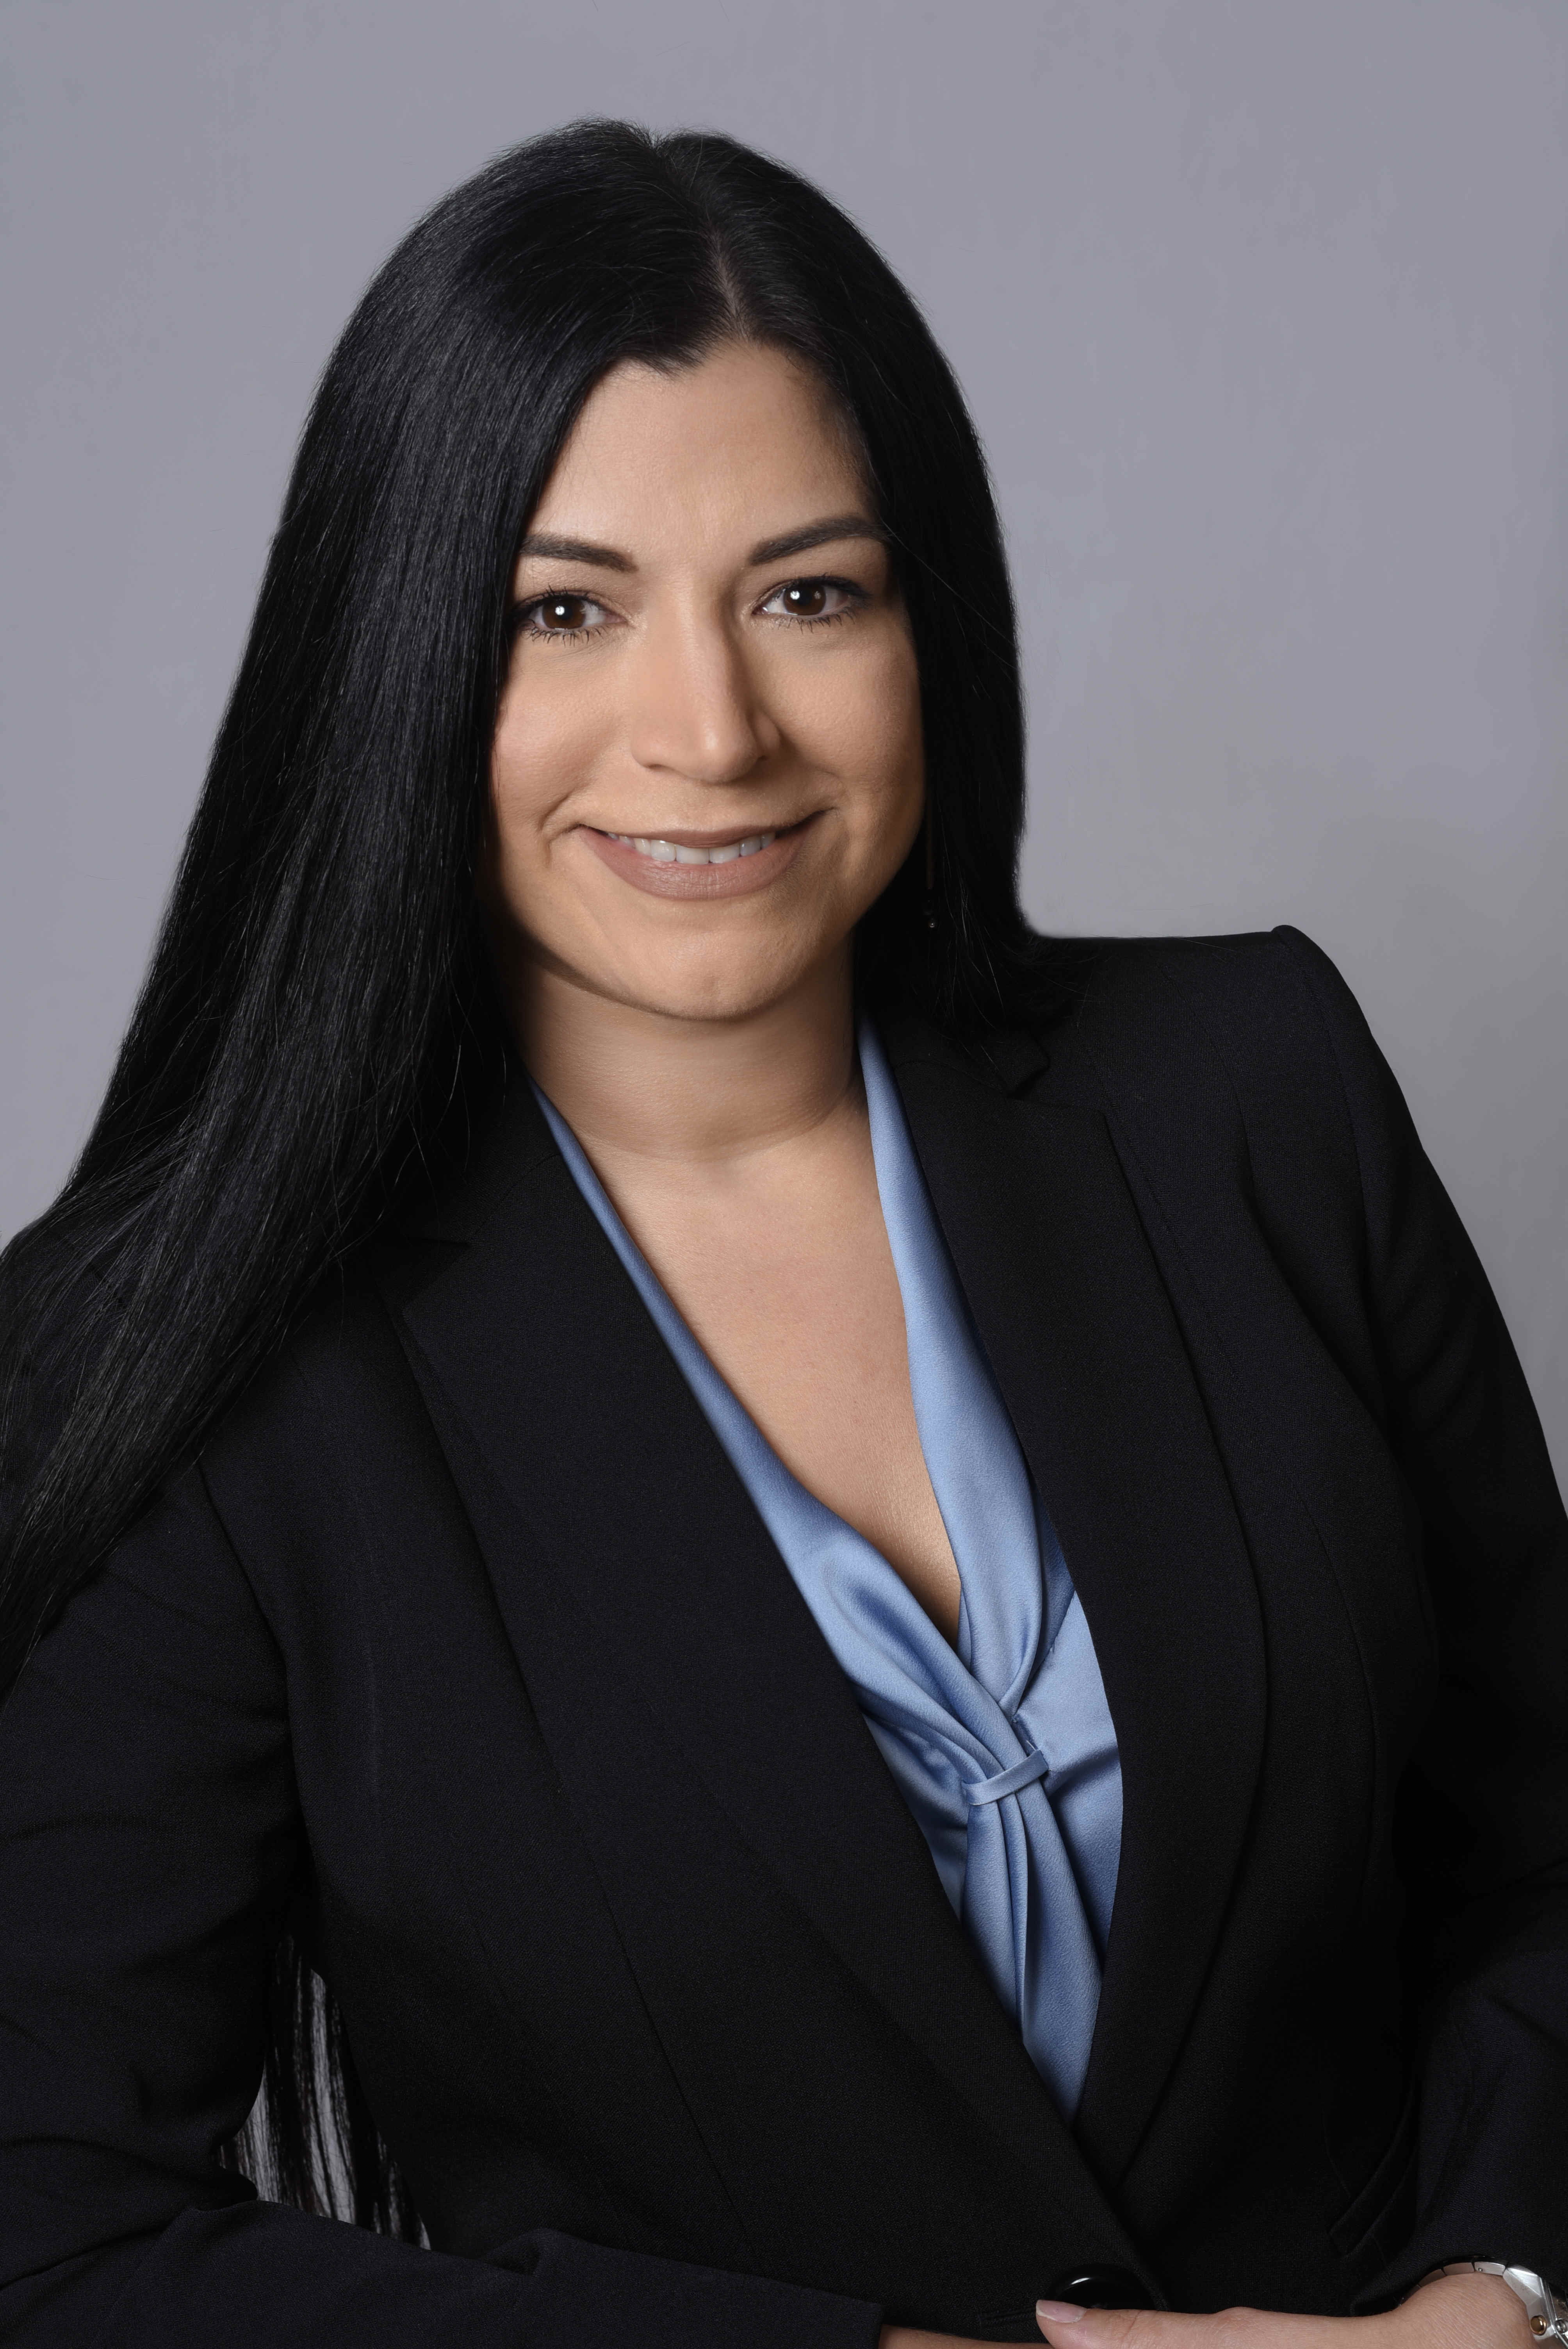 Eng. Rebecca Ocasio, RSM Puerto Rico Consulting Manager